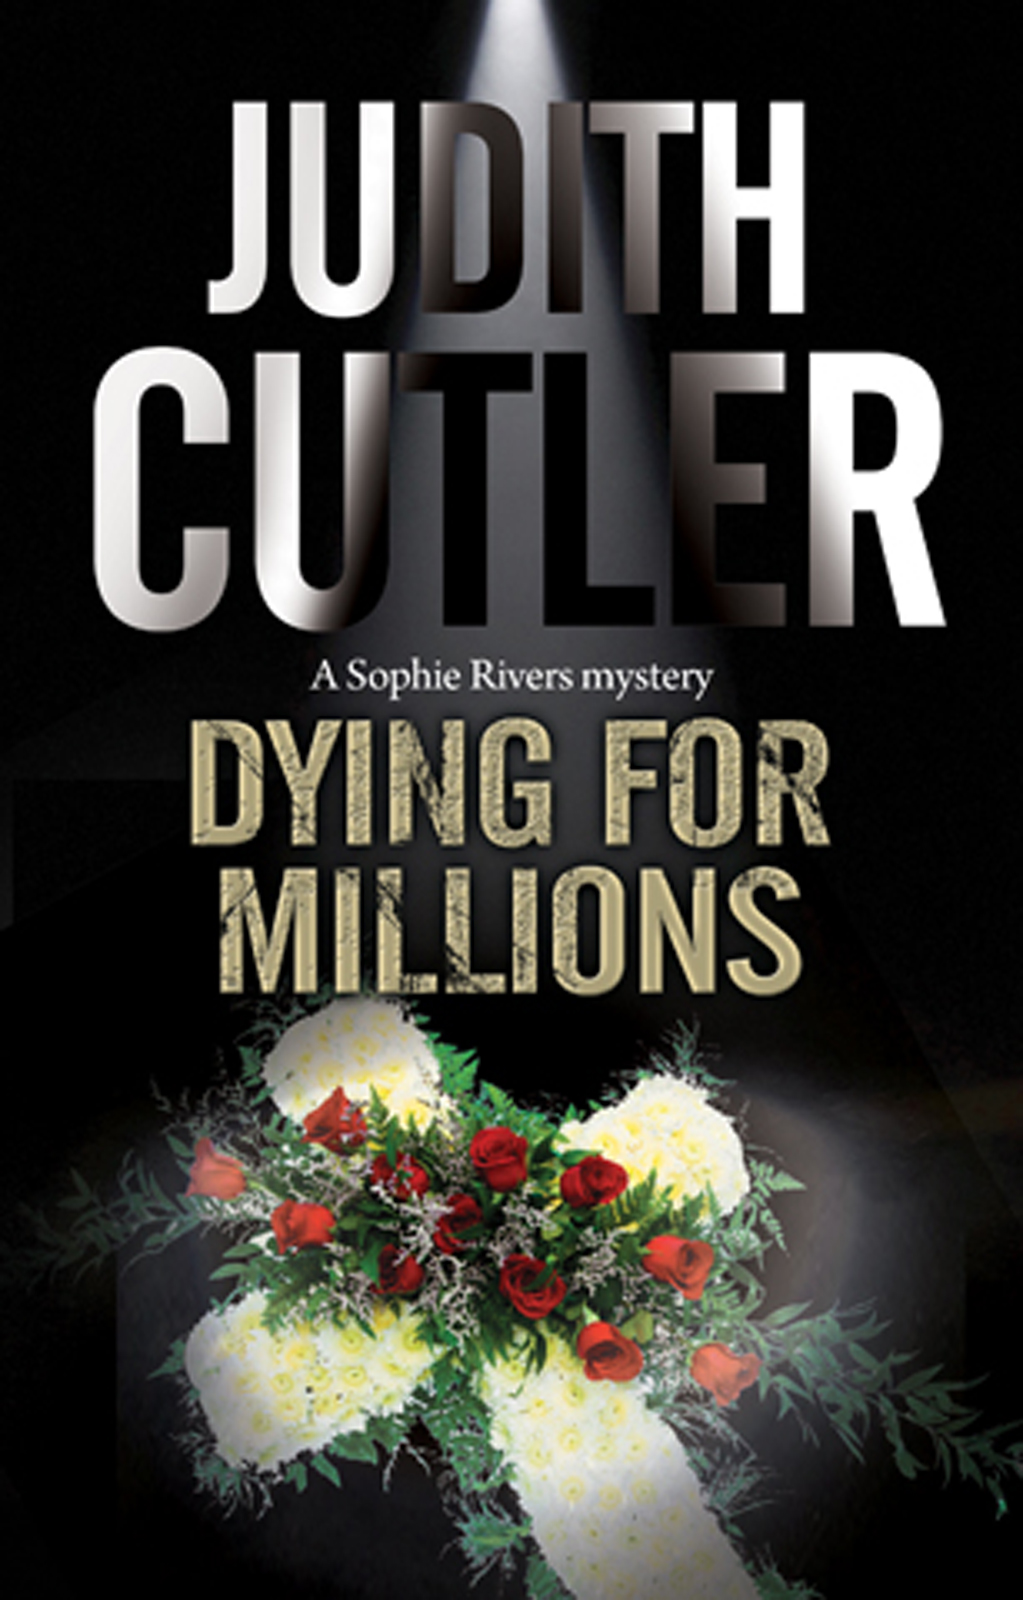 Dying for Millions (2014) by Judith Cutler